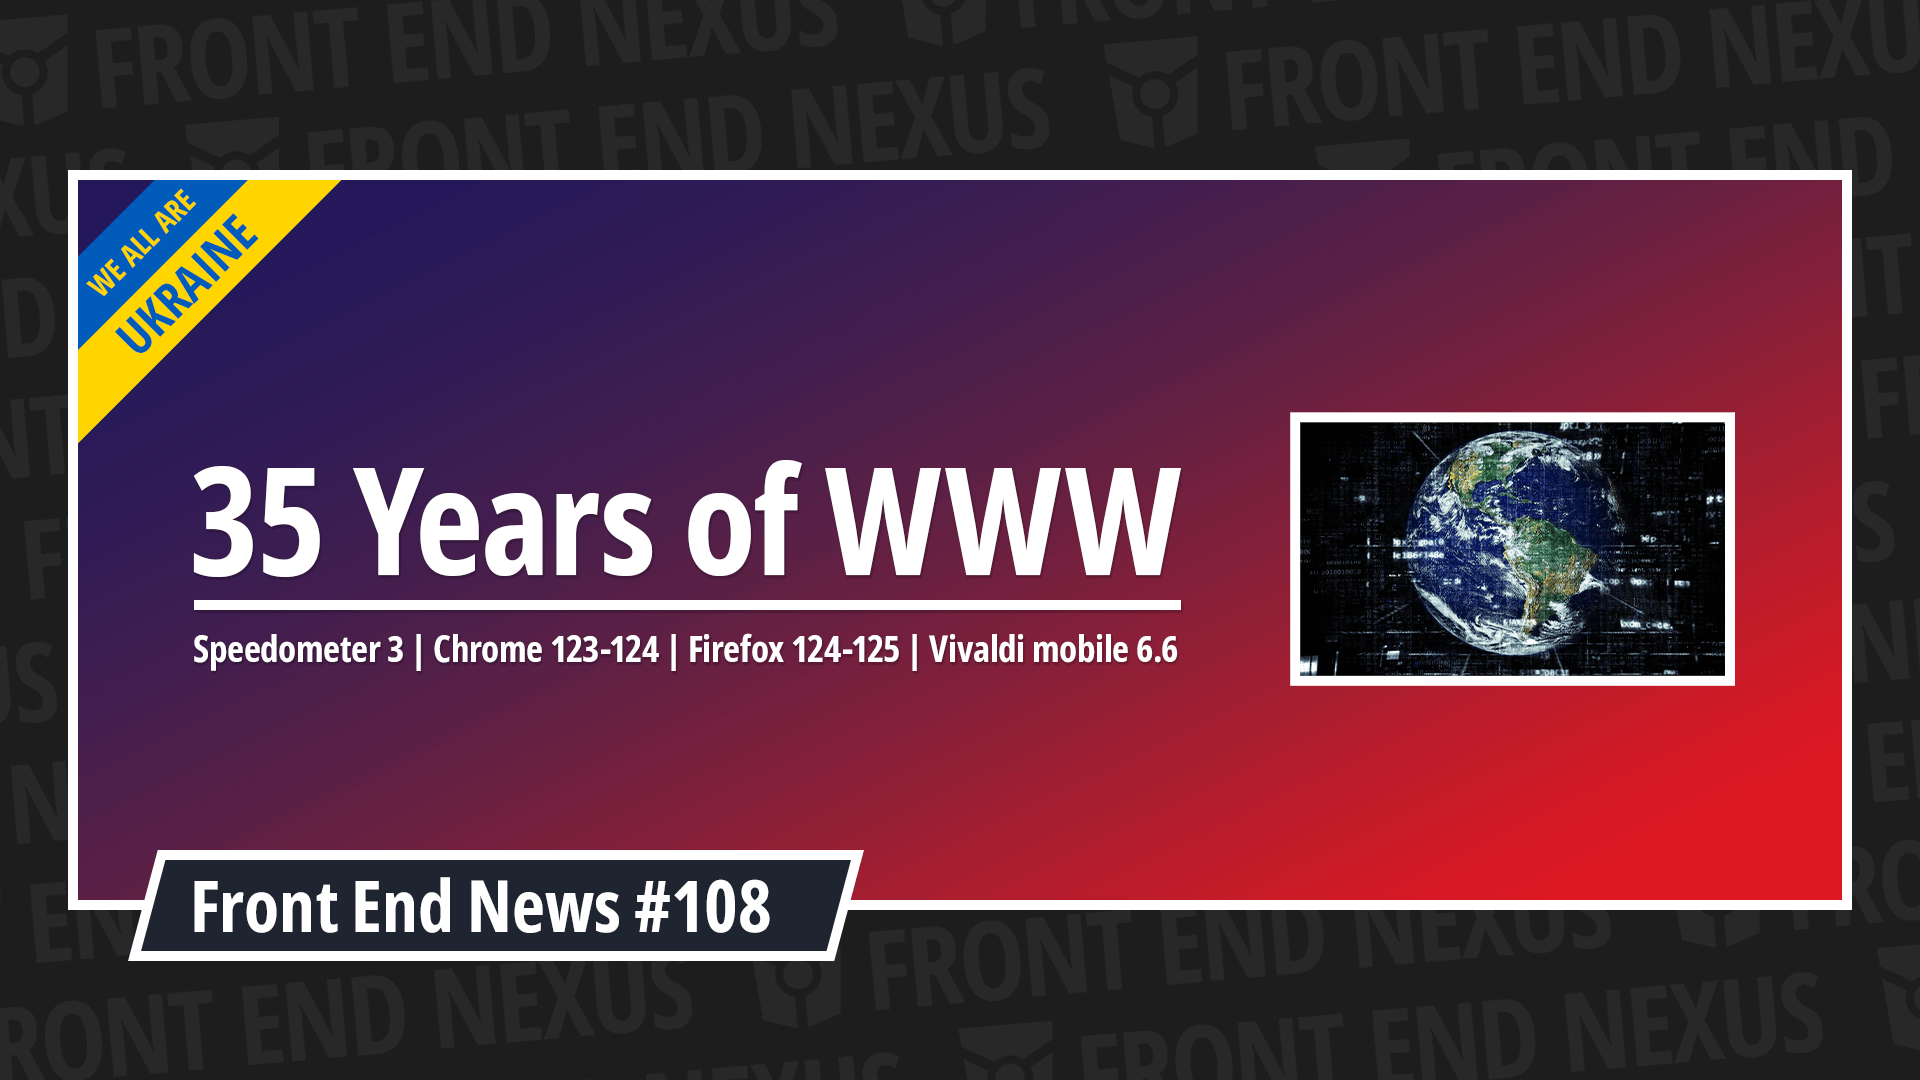 35 Years of Web, Speedometer 3, Chrome 123-124, Firefox 124-125, Vivaldi mobile 6.6, and more | Front End News #108